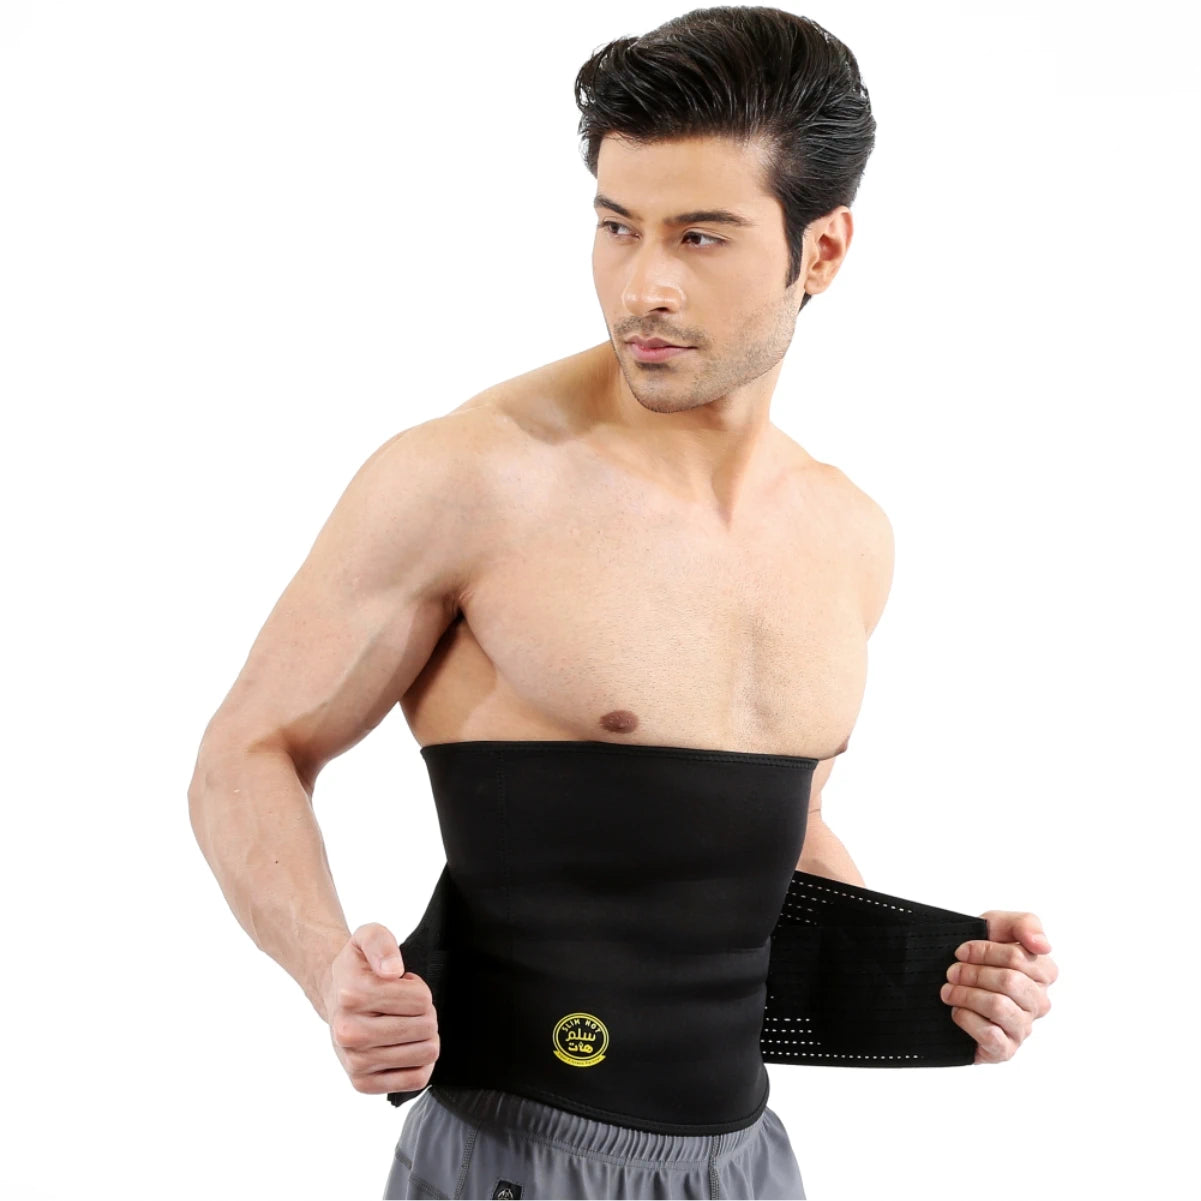 Top Quality Store Original Sweat Slim Belt Tummy Trimmer Belt to Belly  Waist hot Slimming Belly Shaper Weight Loss for Women Fat Buster Home Gym